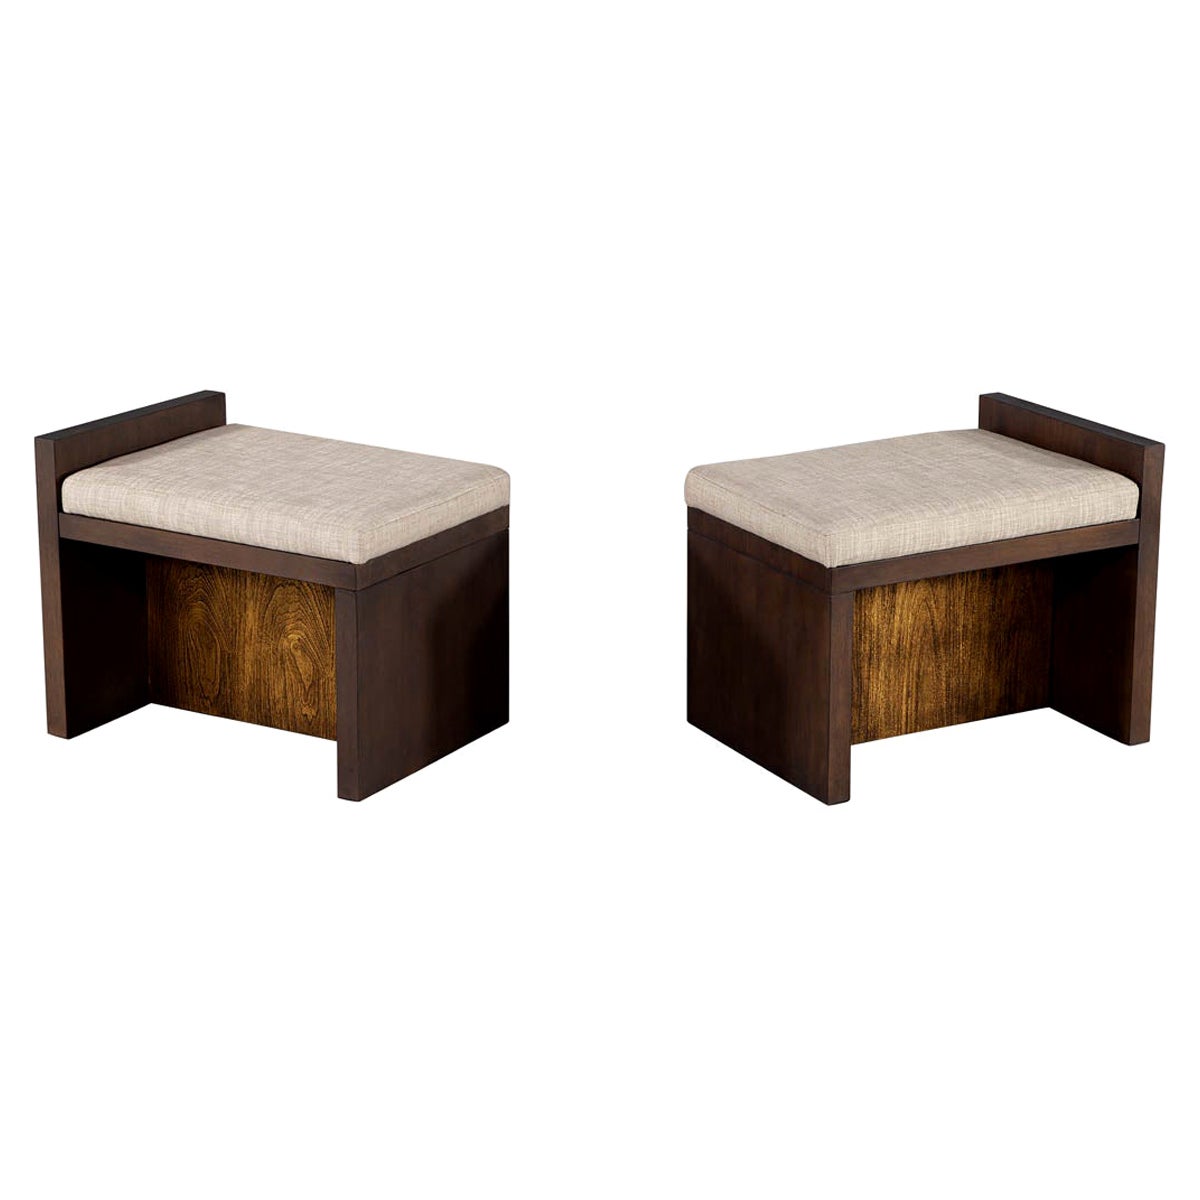 Pair of Modern Walnut Benches by Lara Mann For Sale